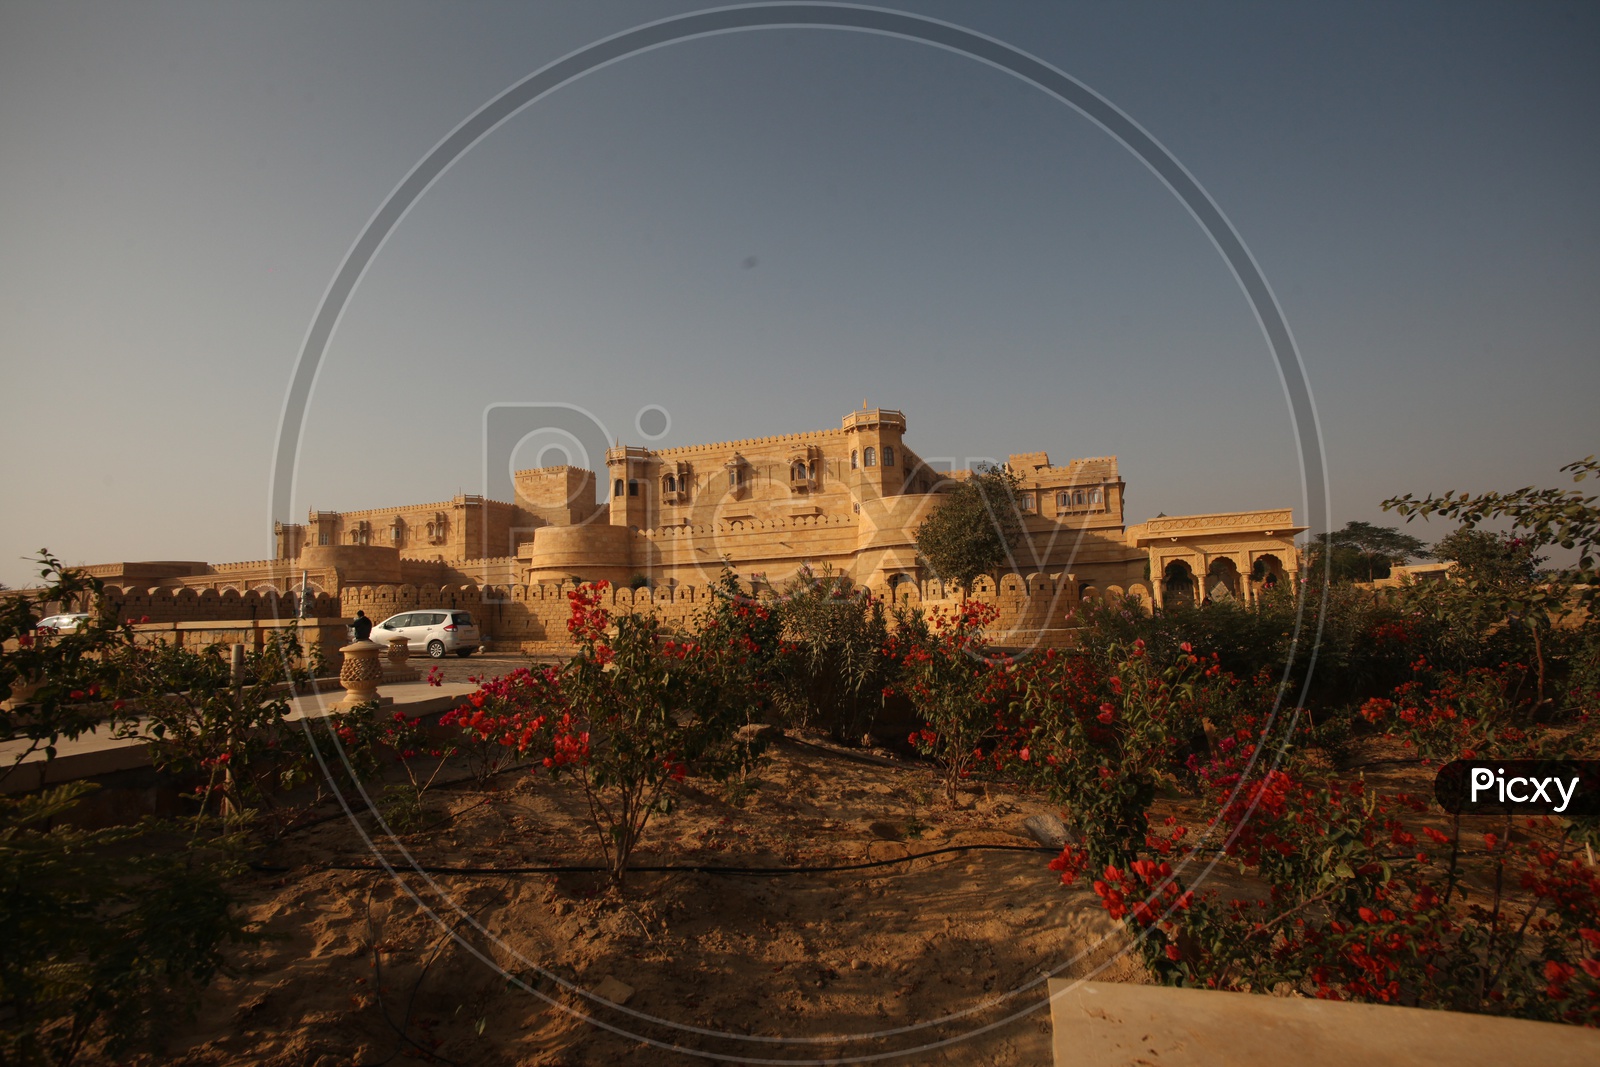 Historic architecture of a Palace in Rajasthan